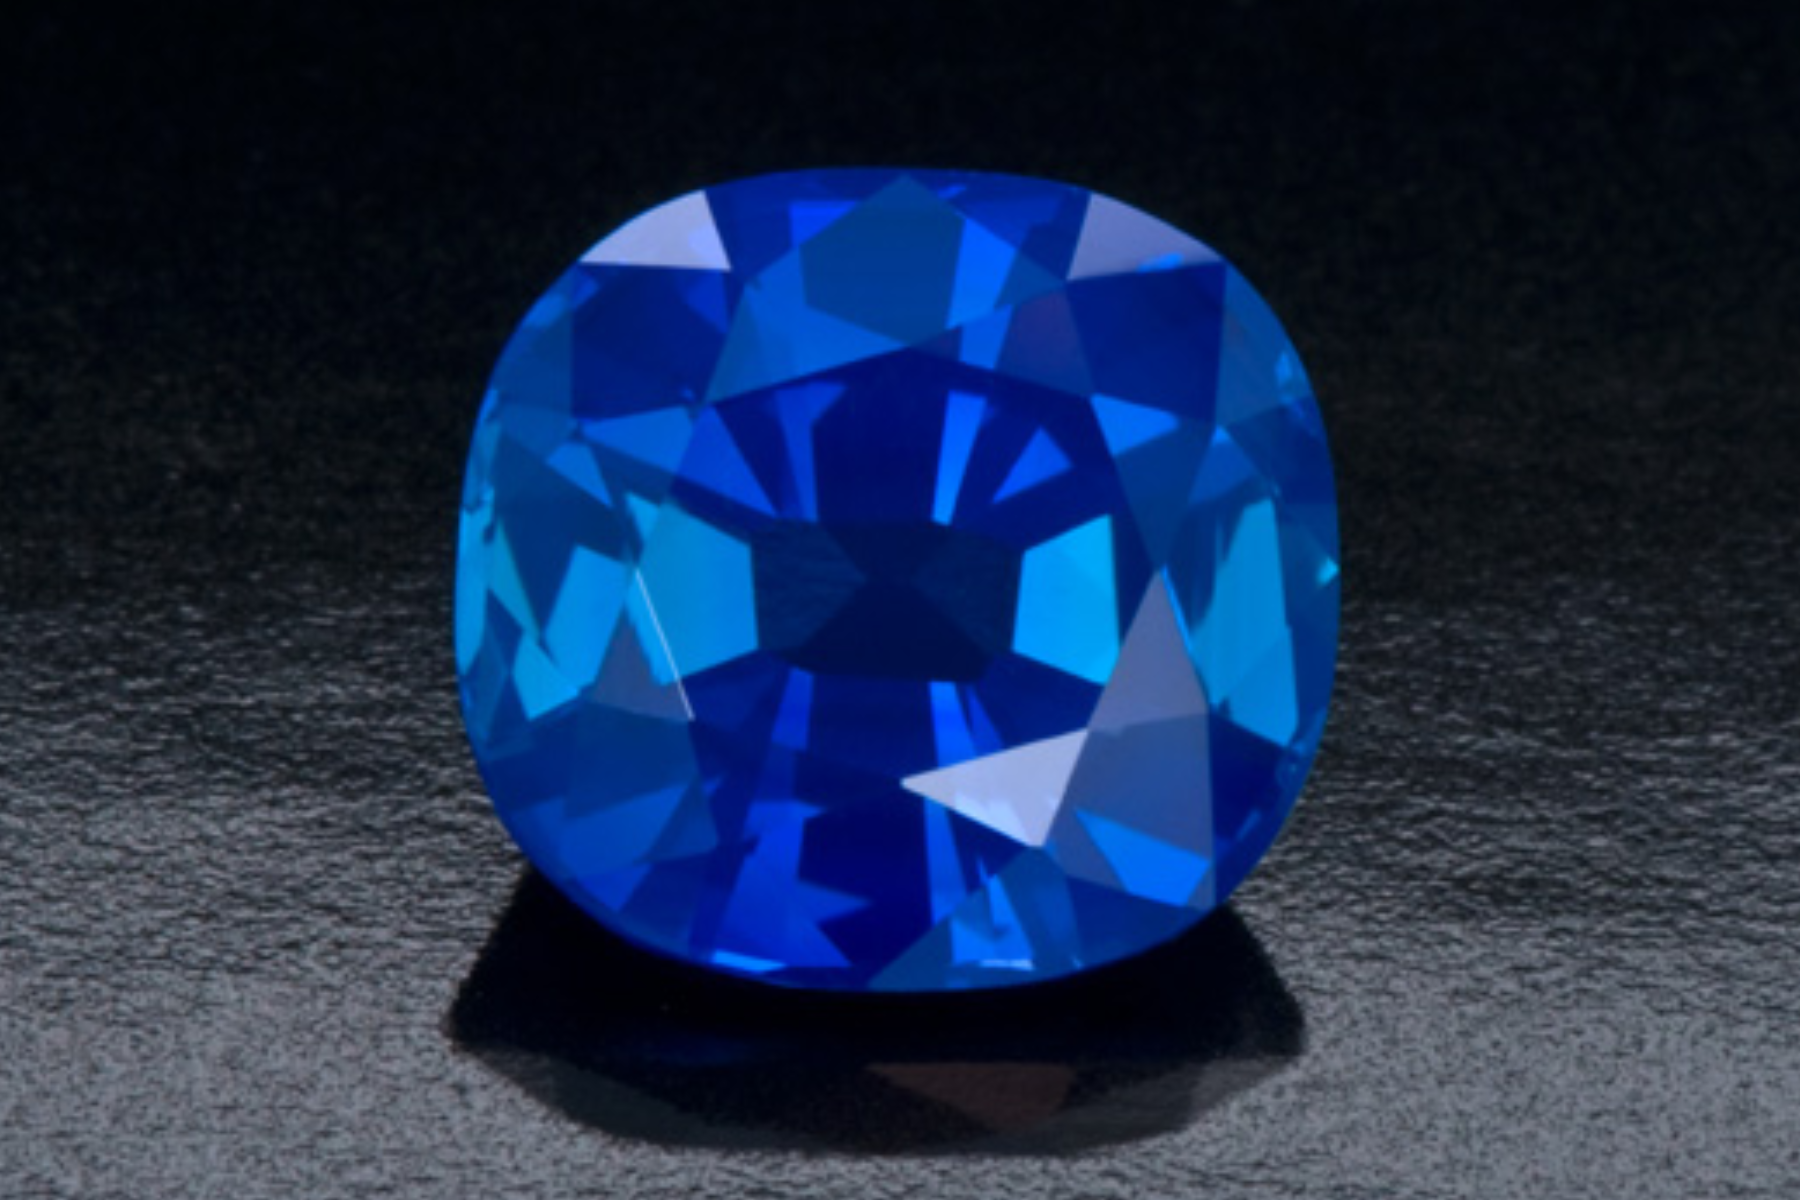 A blue sapphire with rounded edges is displayed on a partially dark background